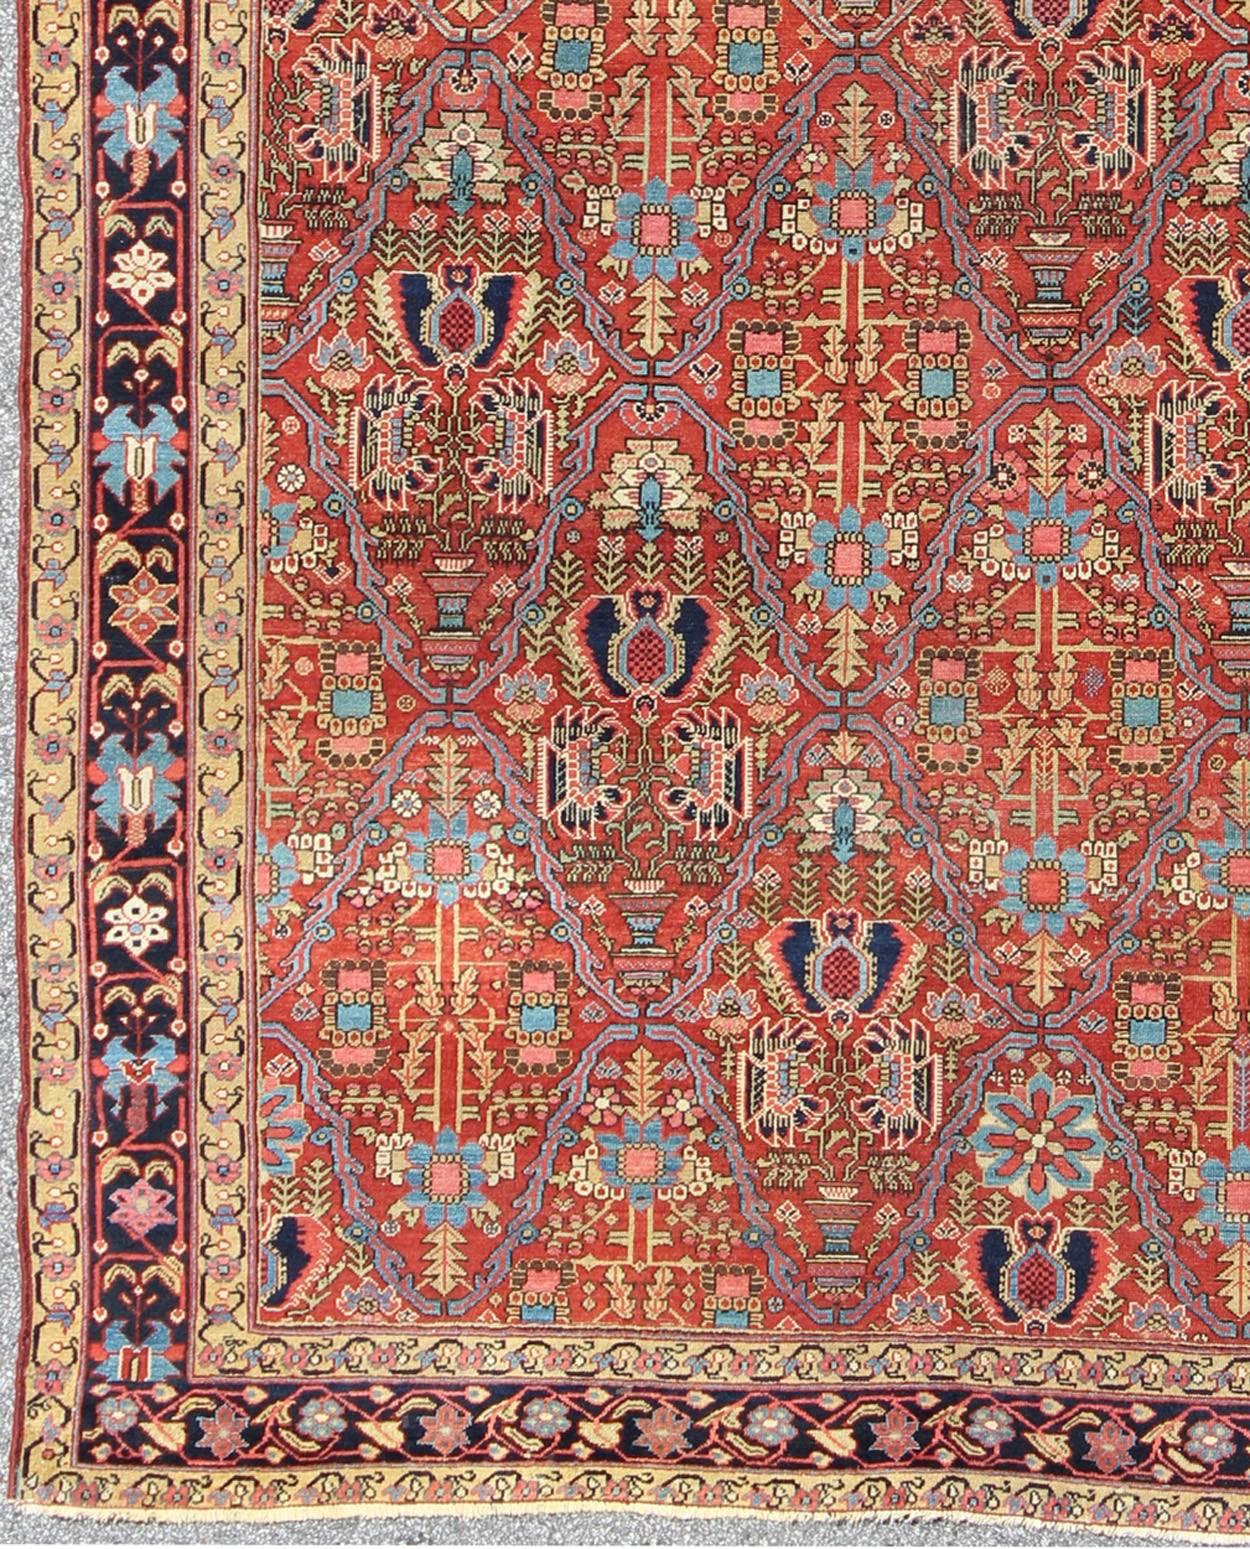 Measures: 7'6 x 11'2.
The richly colored and intricate design of this handwoven, antique 19th century Malayer rug distinguishes it from all others of its kind. The iconic all-over design consists of a flower centered within a diamond and surrounded